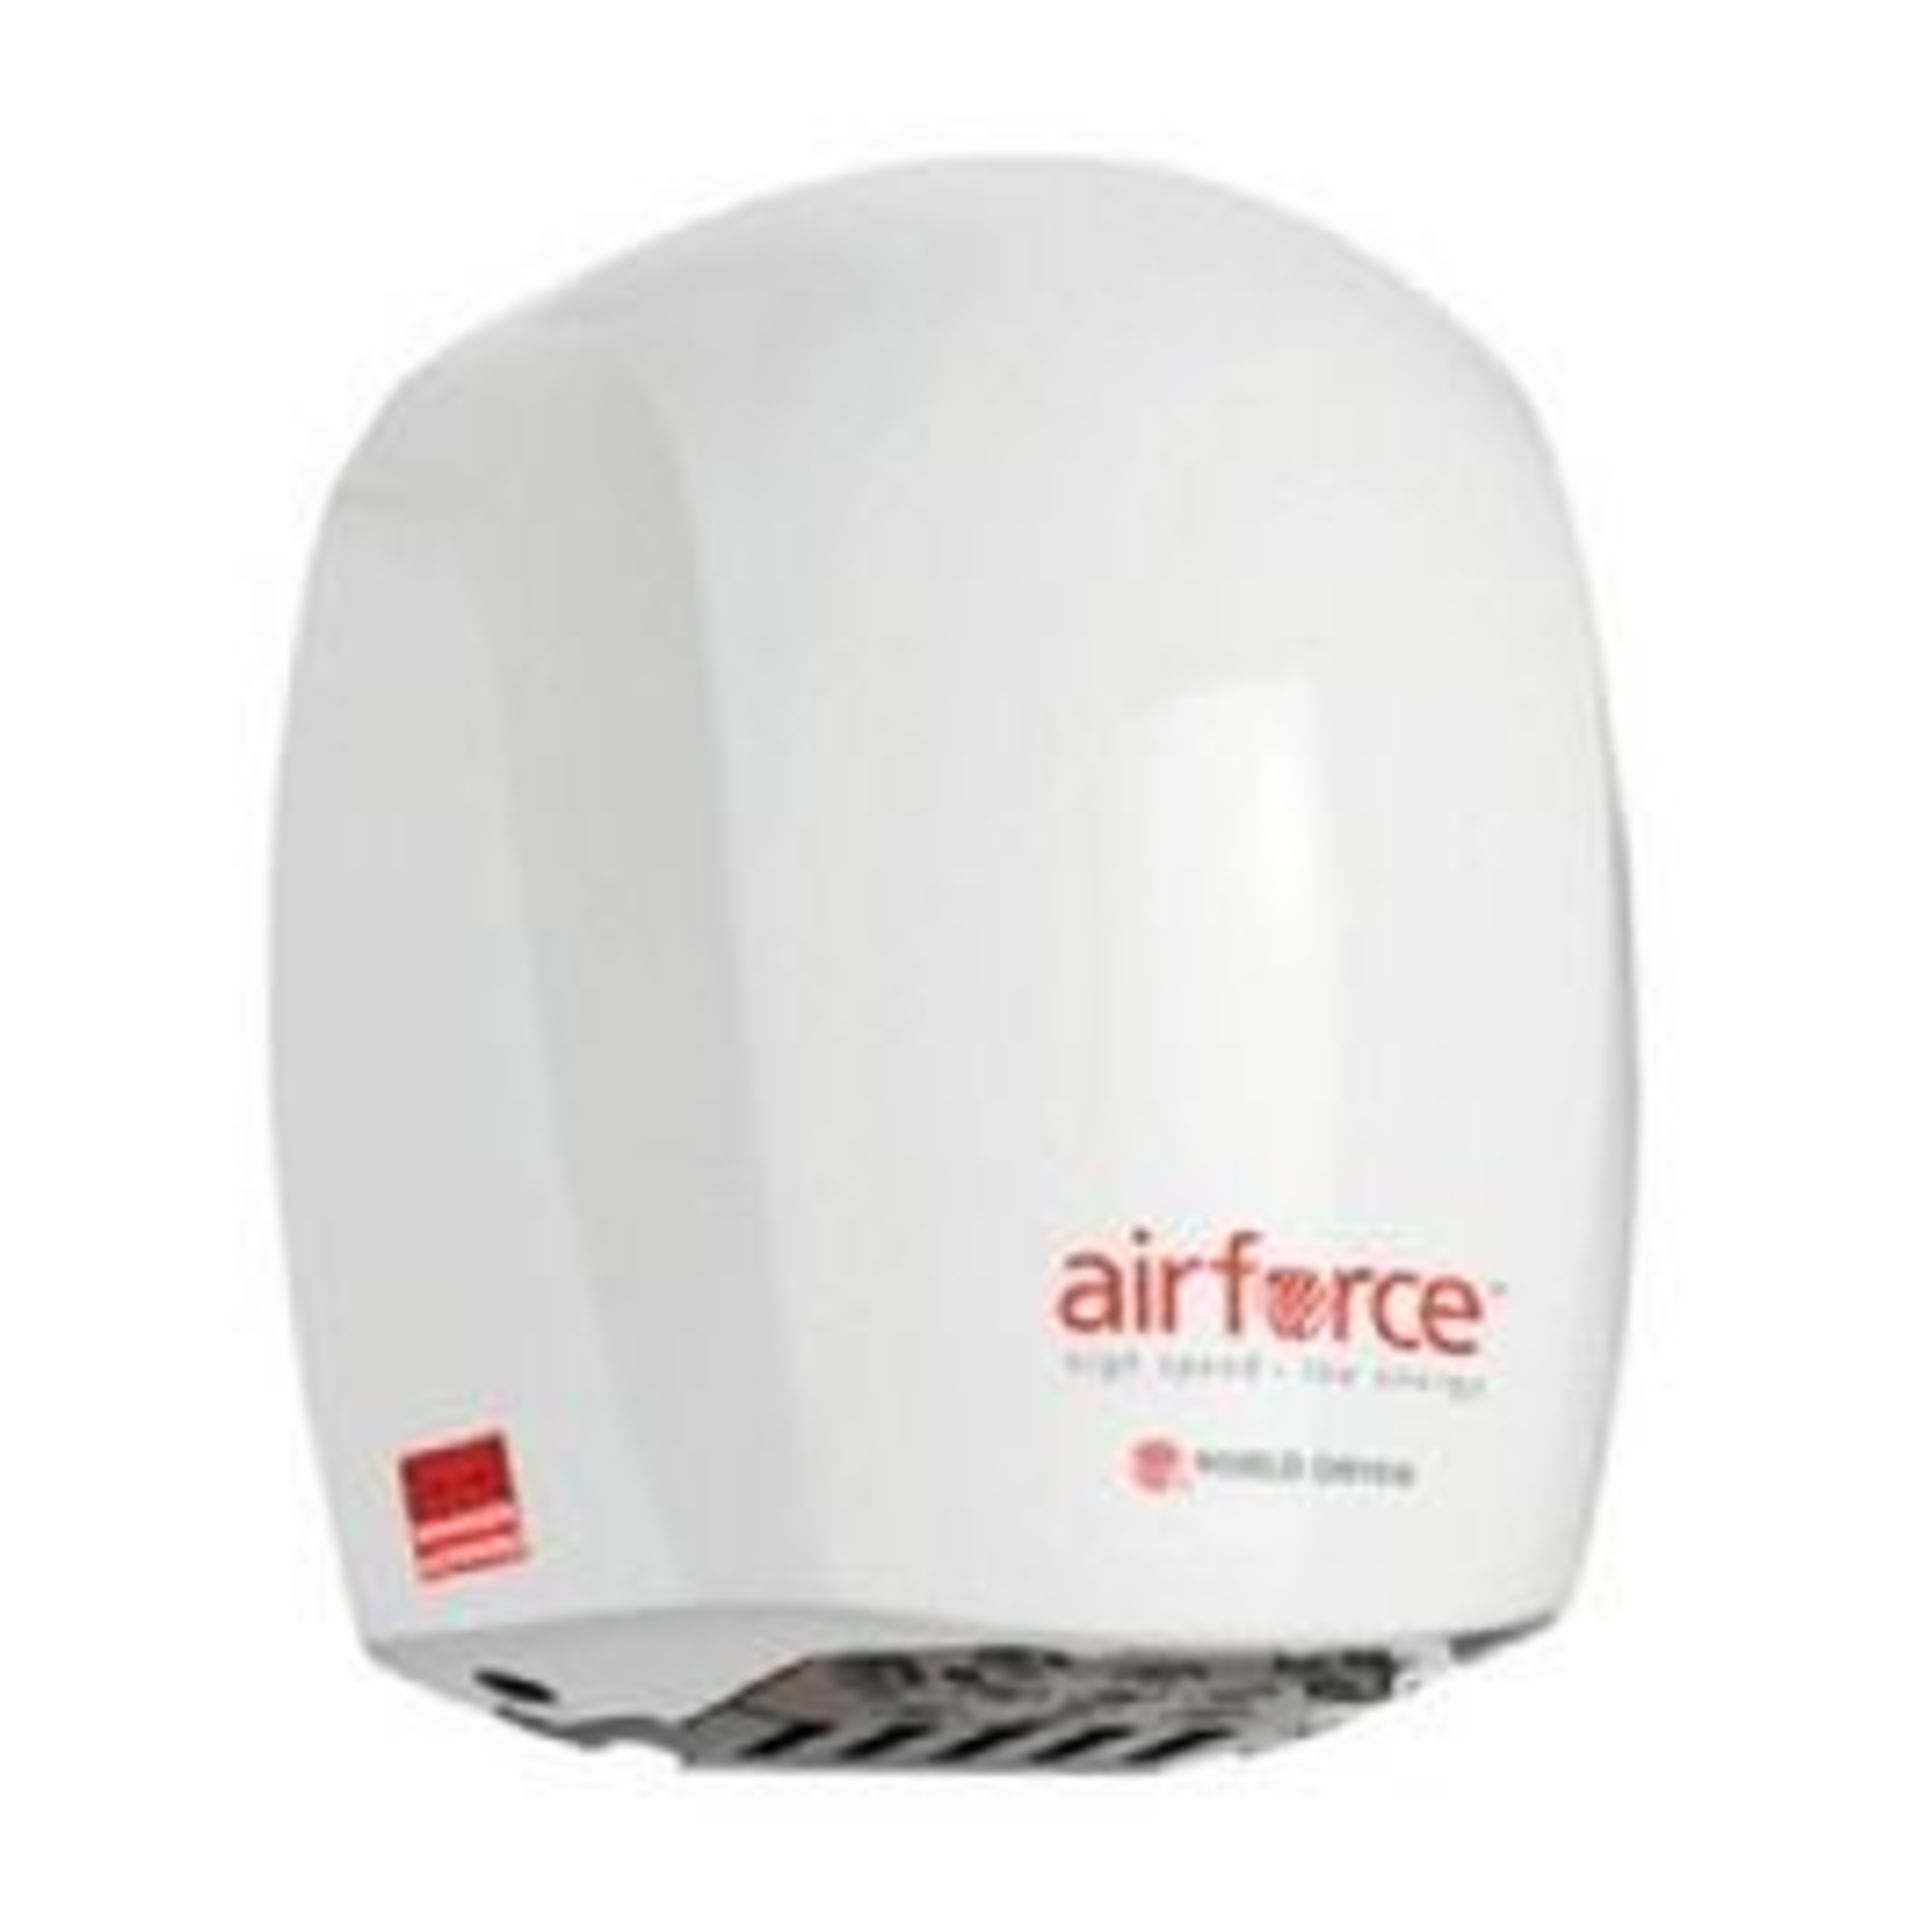 1 x Air Force High Speed Low Energy Electric Hand Dryer - Mode J48-974W3 - Brand New and Boxed - - Image 4 of 4